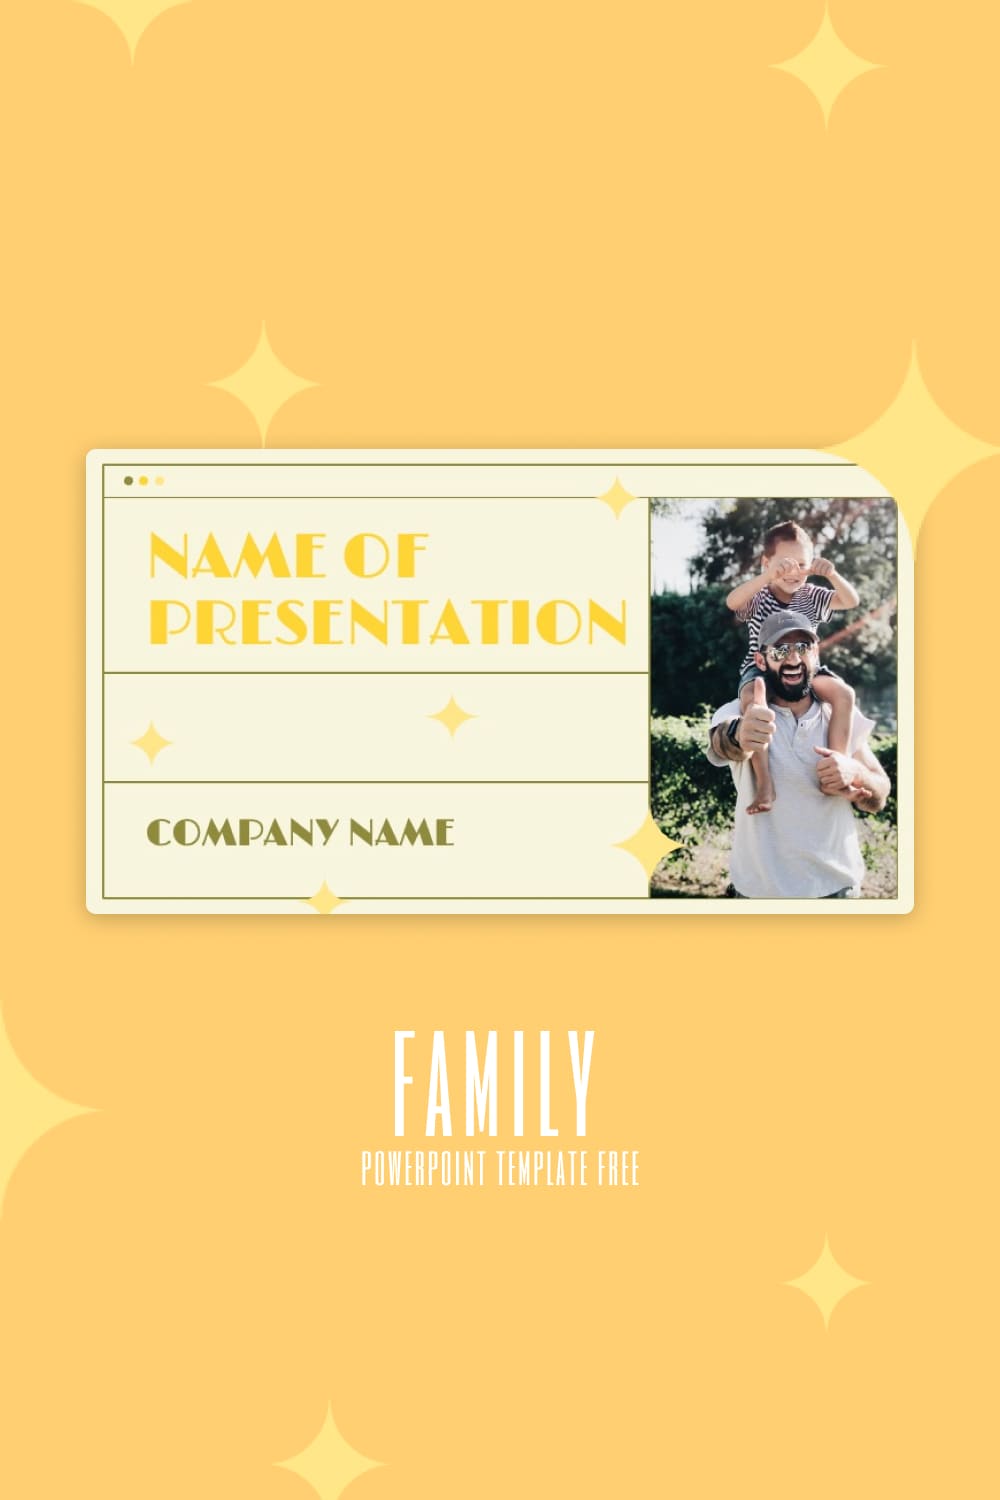 Family Powerpoint Template Free Pinterest.